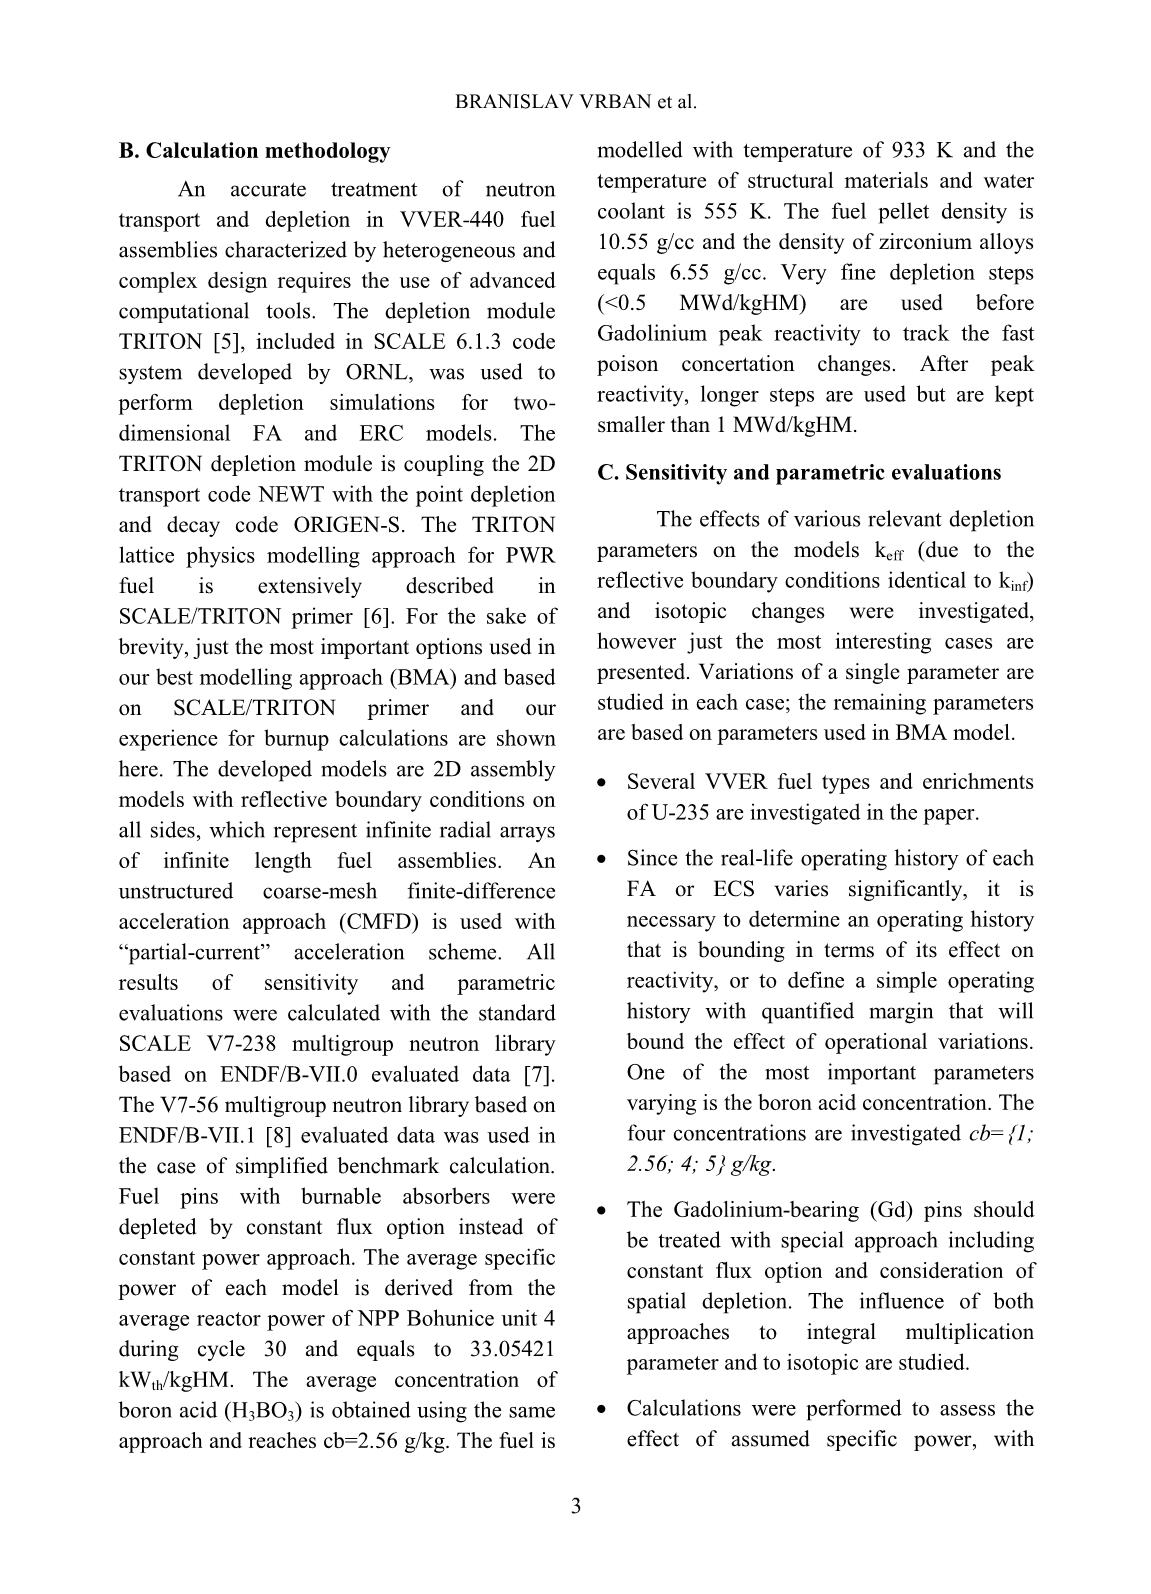 Nuclear Science and Technology - Volume 9, Number 2, June 2019 trang 6